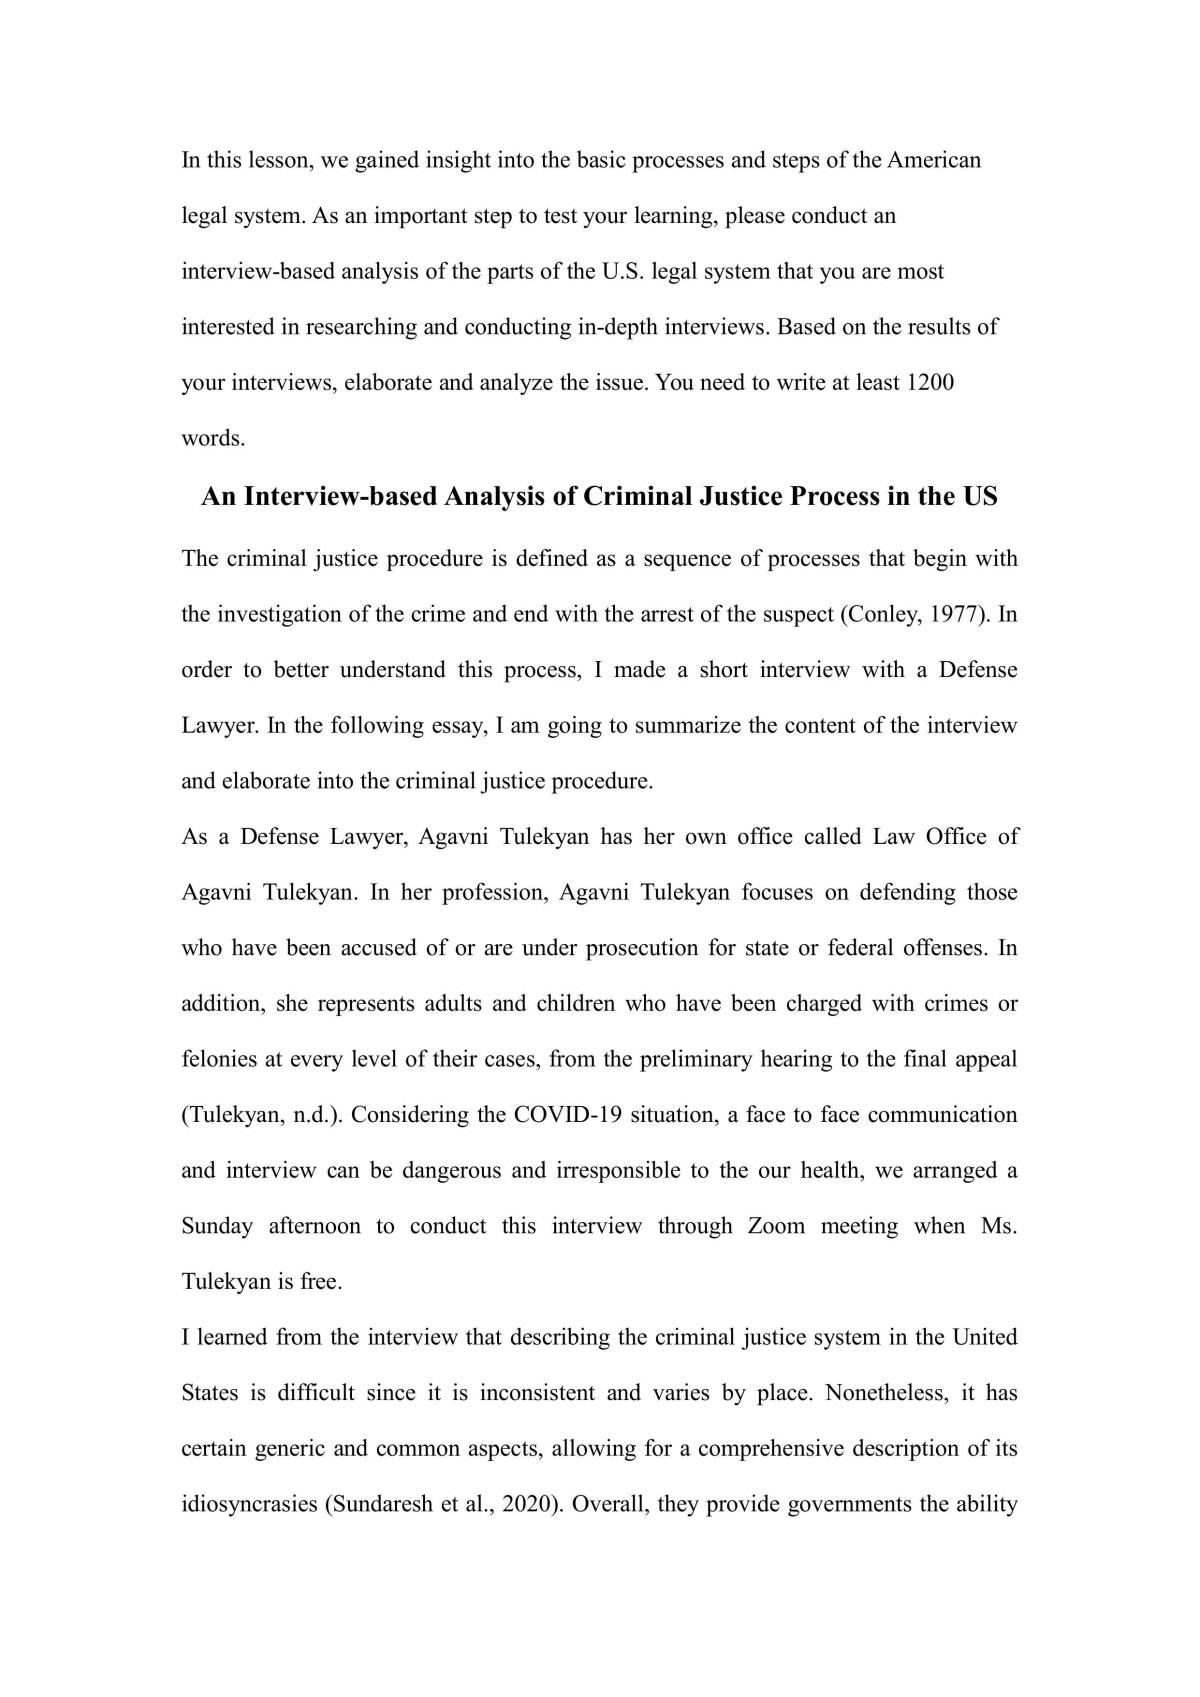 An Interview-based Analysis of Criminal Justice Process in the US - Page 1